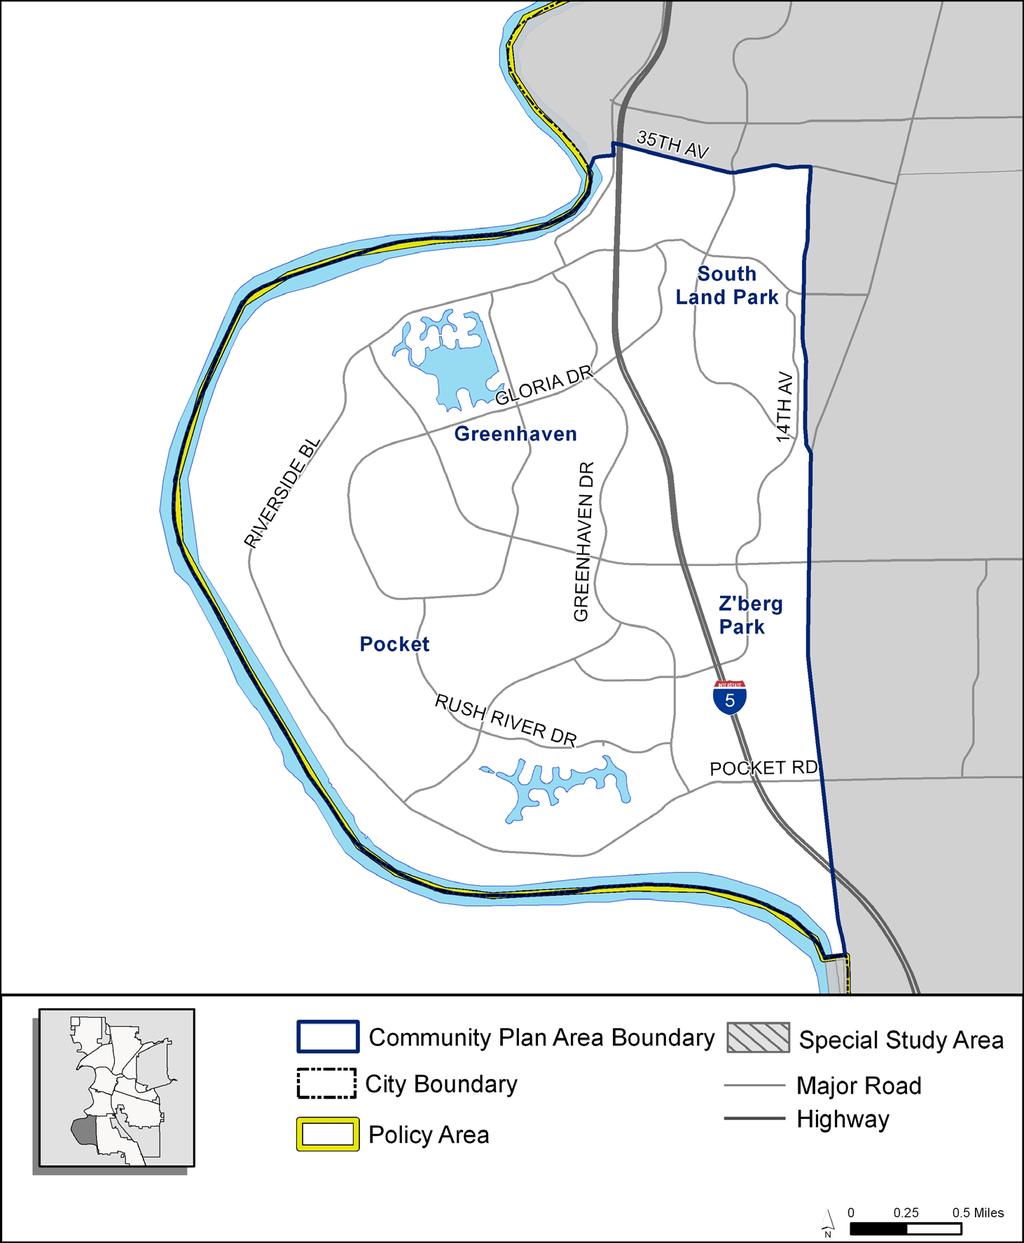 POCKET COMMUNITY PLAN Community Location The Pocket Community Plan Area and neighborhoods are located south of Downtown Sacramento in a pocket of land created by a bend in the Sacramento River, as